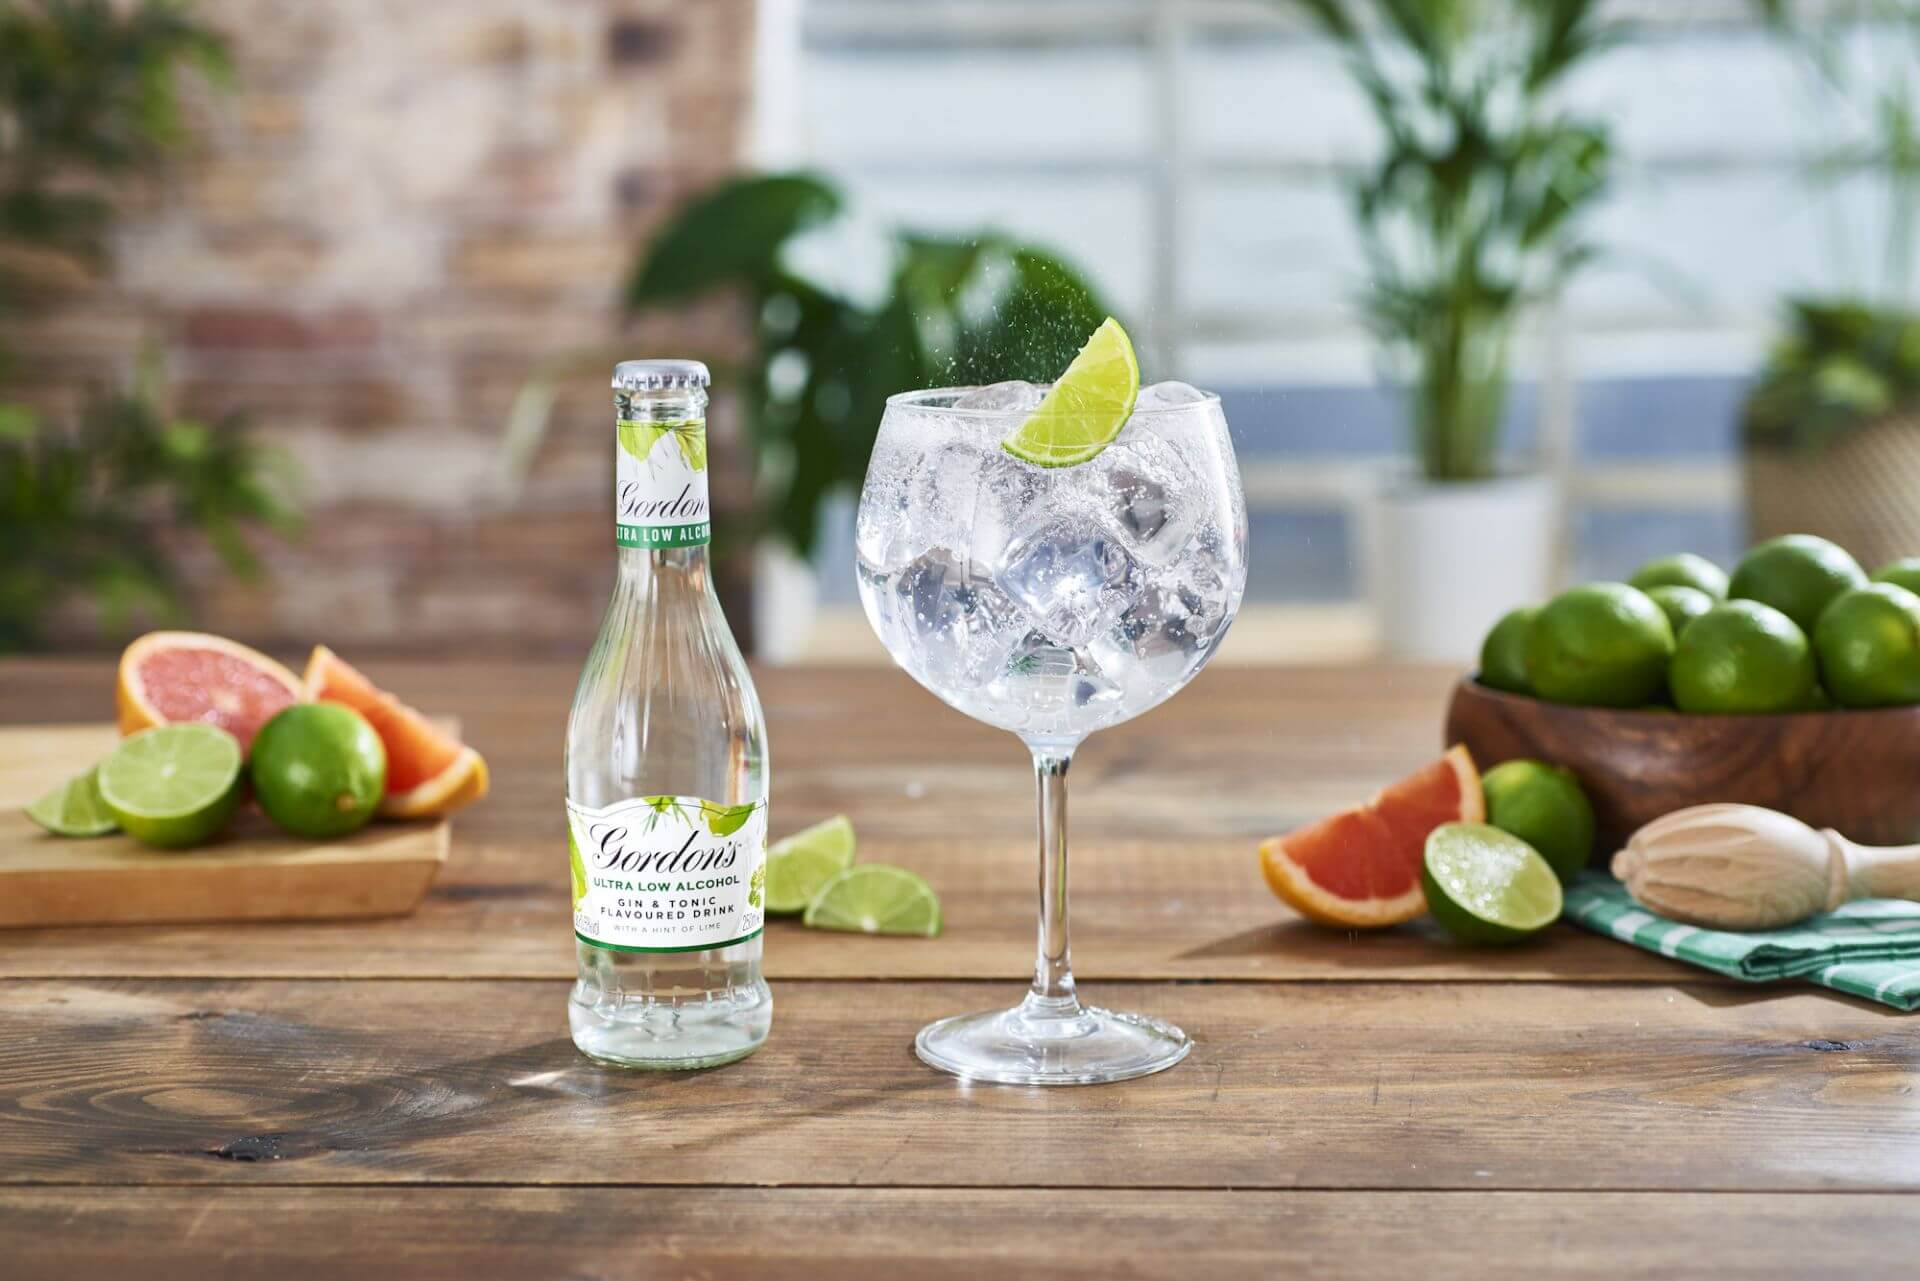 Gordon's Ultra Low Alcohol G&T With Lime (4 x 250ml)